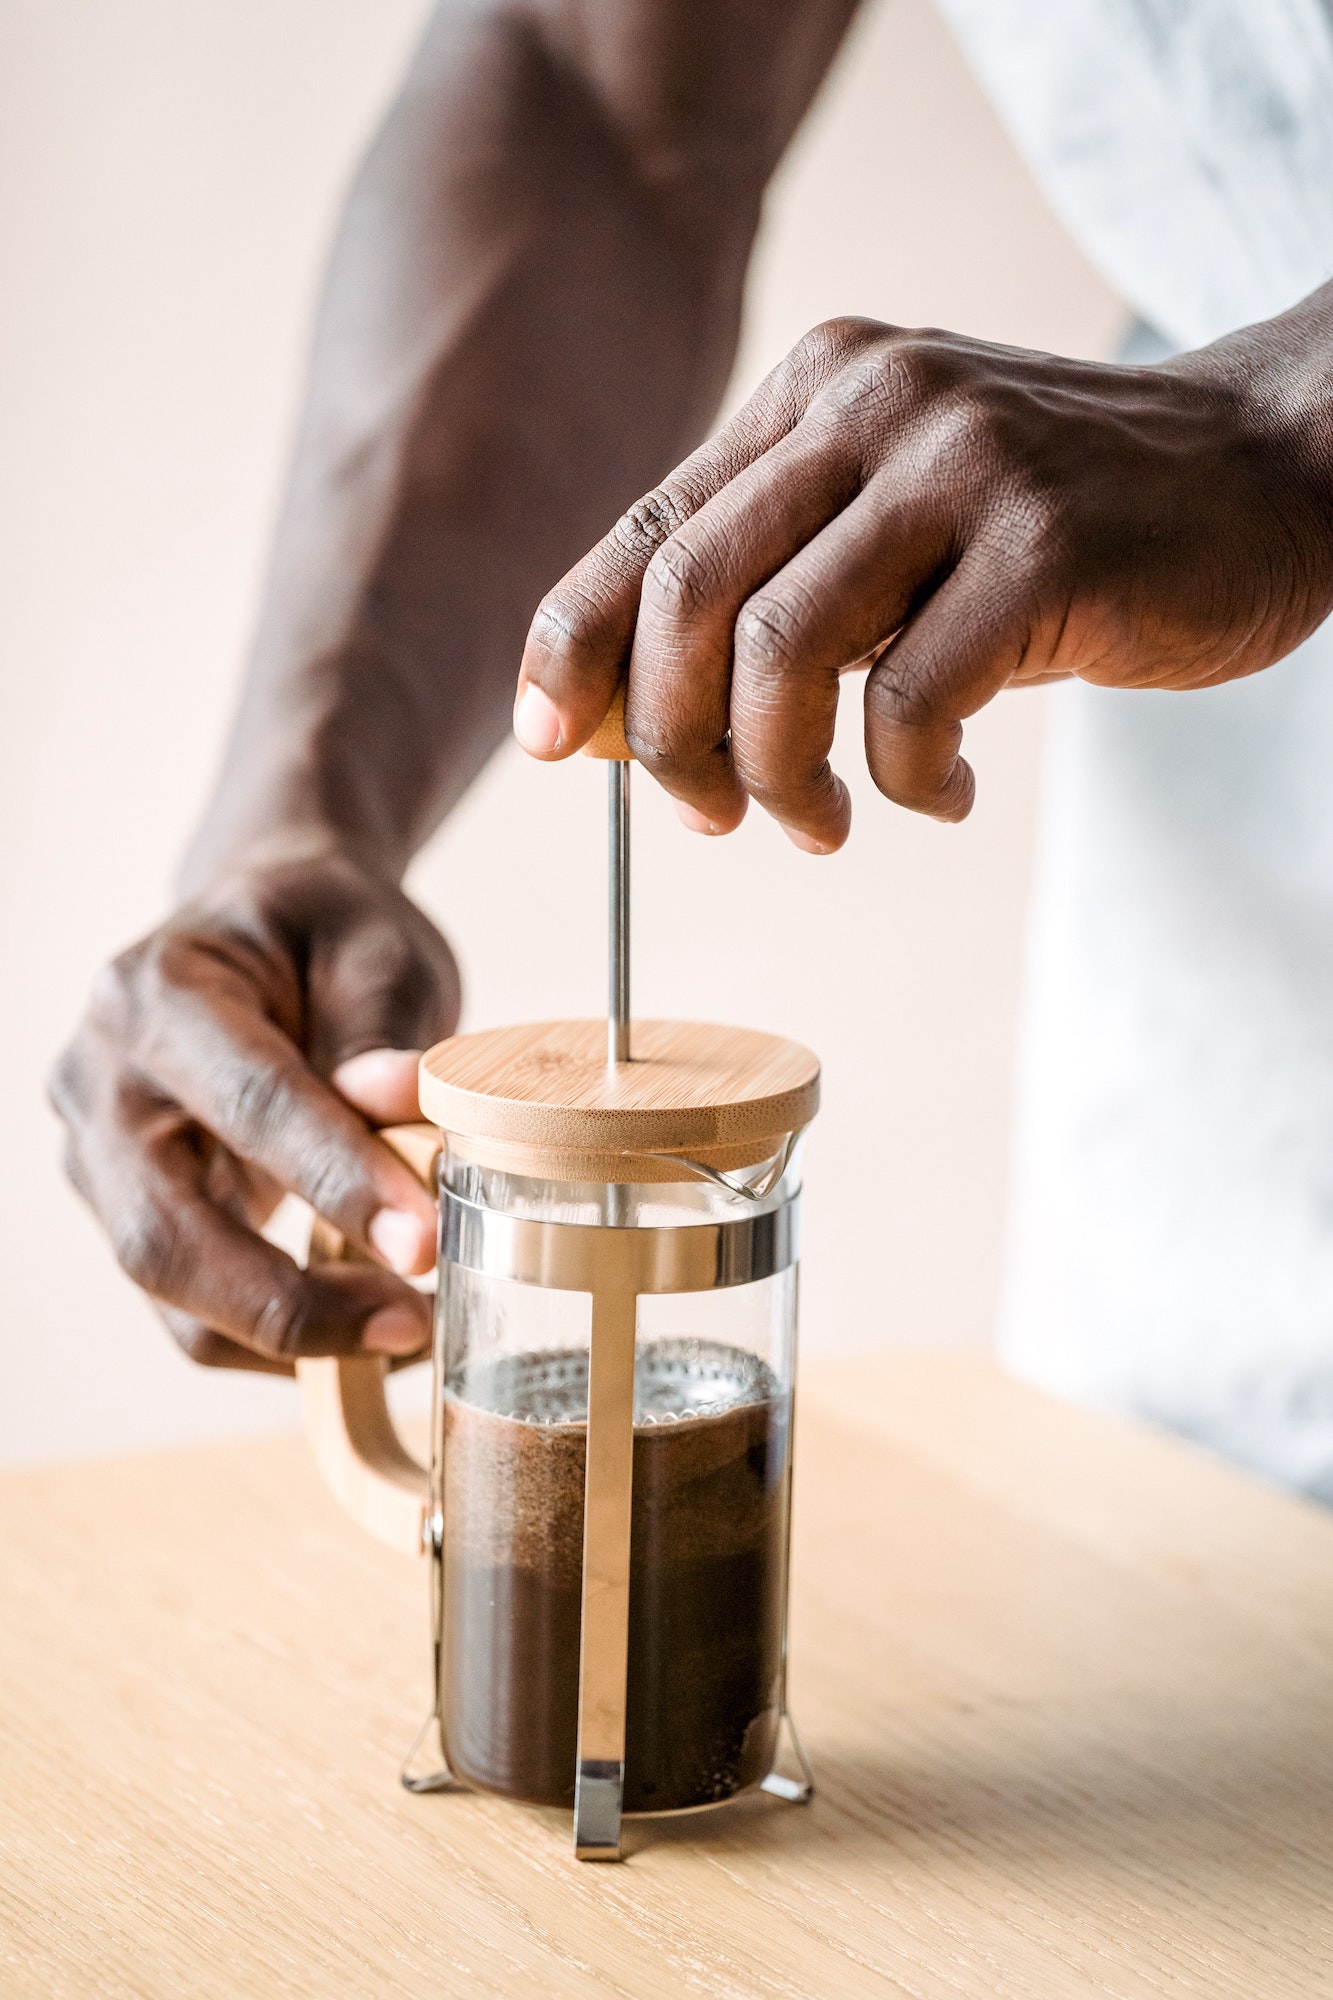 The French press dates back to as early as 1852, and since then it has become one of the most recognizable pieces of coffee culture around the world